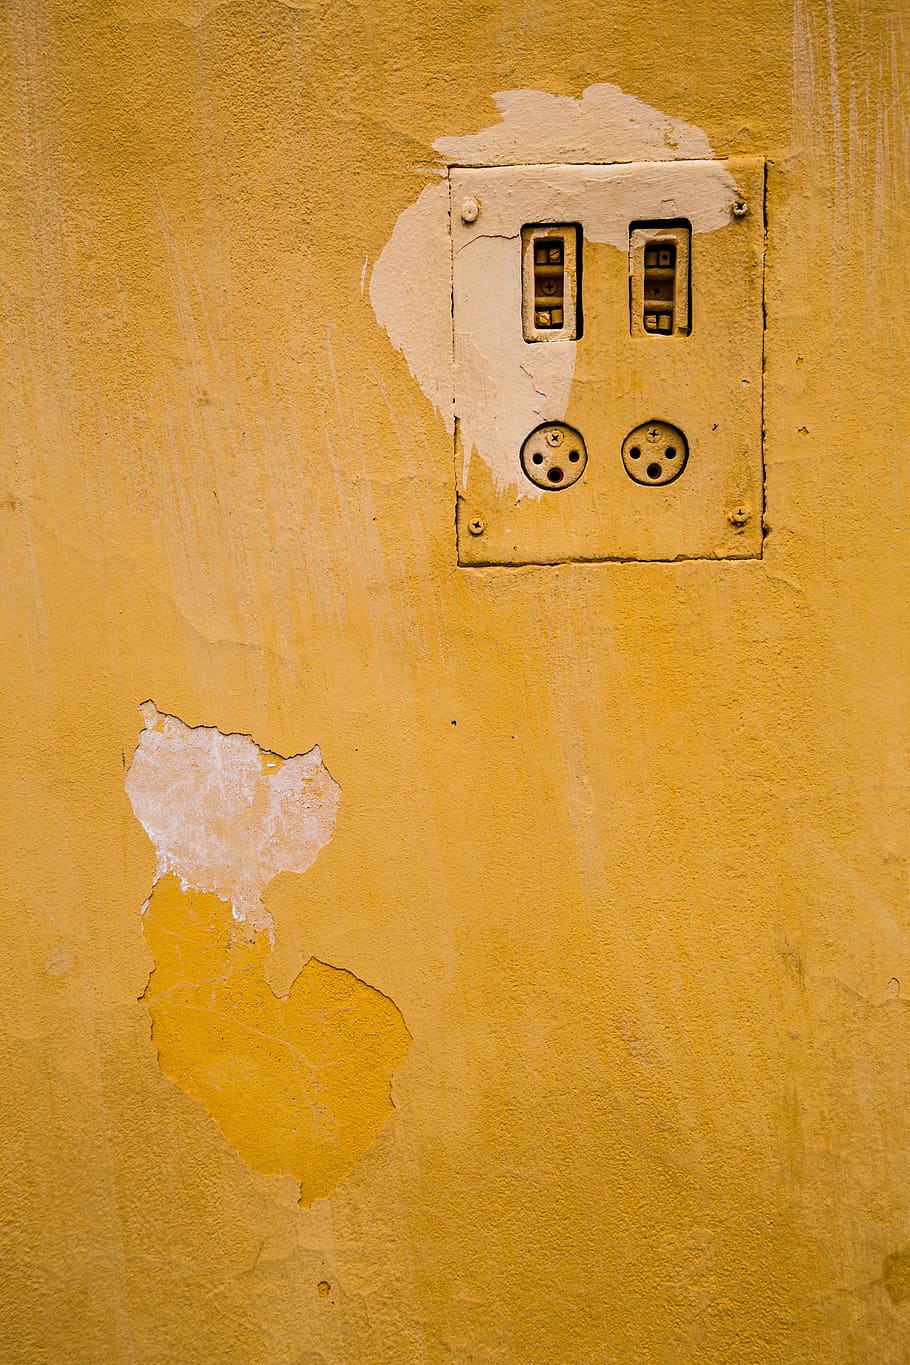 wall, yellow, socket, wall - building feature, old, close-up, architecture, built structure, backgrounds, weathered